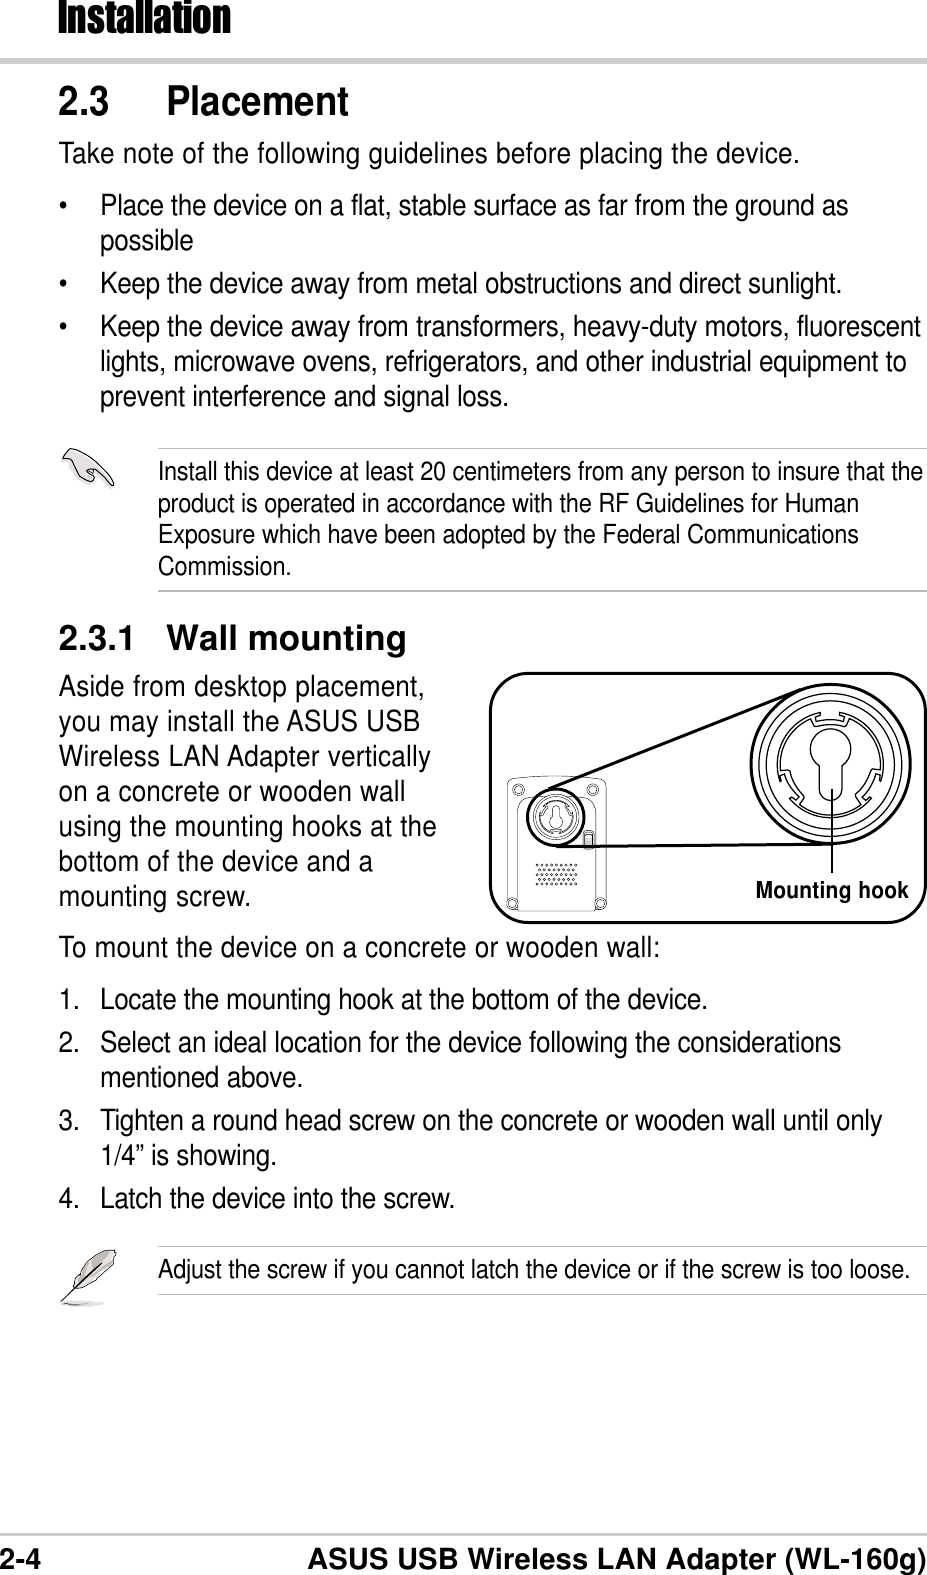 2-4 ASUS USB Wireless LAN Adapter (WL-160g)Installation2.3.1 Wall mountingAside from desktop placement,you may install the ASUS USBWireless LAN Adapter verticallyon a concrete or wooden wallusing the mounting hooks at thebottom of the device and amounting screw.To mount the device on a concrete or wooden wall:1. Locate the mounting hook at the bottom of the device.2. Select an ideal location for the device following the considerationsmentioned above.3. Tighten a round head screw on the concrete or wooden wall until only1/4” is showing.4. Latch the device into the screw.Adjust the screw if you cannot latch the device or if the screw is too loose.Install this device at least 20 centimeters from any person to insure that theproduct is operated in accordance with the RF Guidelines for HumanExposure which have been adopted by the Federal CommunicationsCommission.2.3 PlacementTake note of the following guidelines before placing the device.•Place the device on a flat, stable surface as far from the ground aspossible•Keep the device away from metal obstructions and direct sunlight.•Keep the device away from transformers, heavy-duty motors, fluorescentlights, microwave ovens, refrigerators, and other industrial equipment toprevent interference and signal loss.Mounting hook